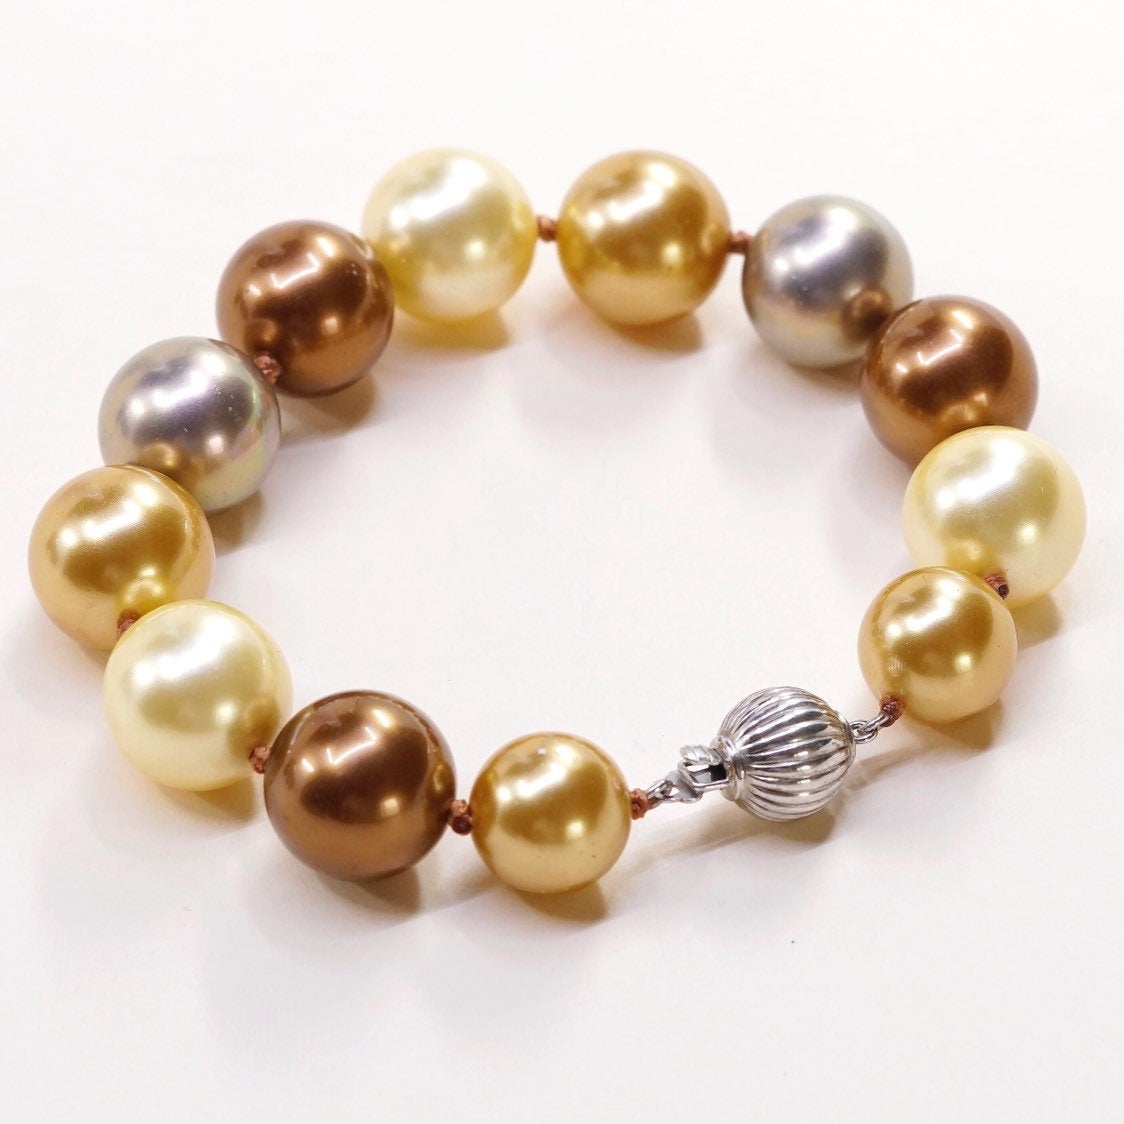 6.5”, Vintage handmade bracelet, gold and earth tone pearl beads w/ 925 clasp